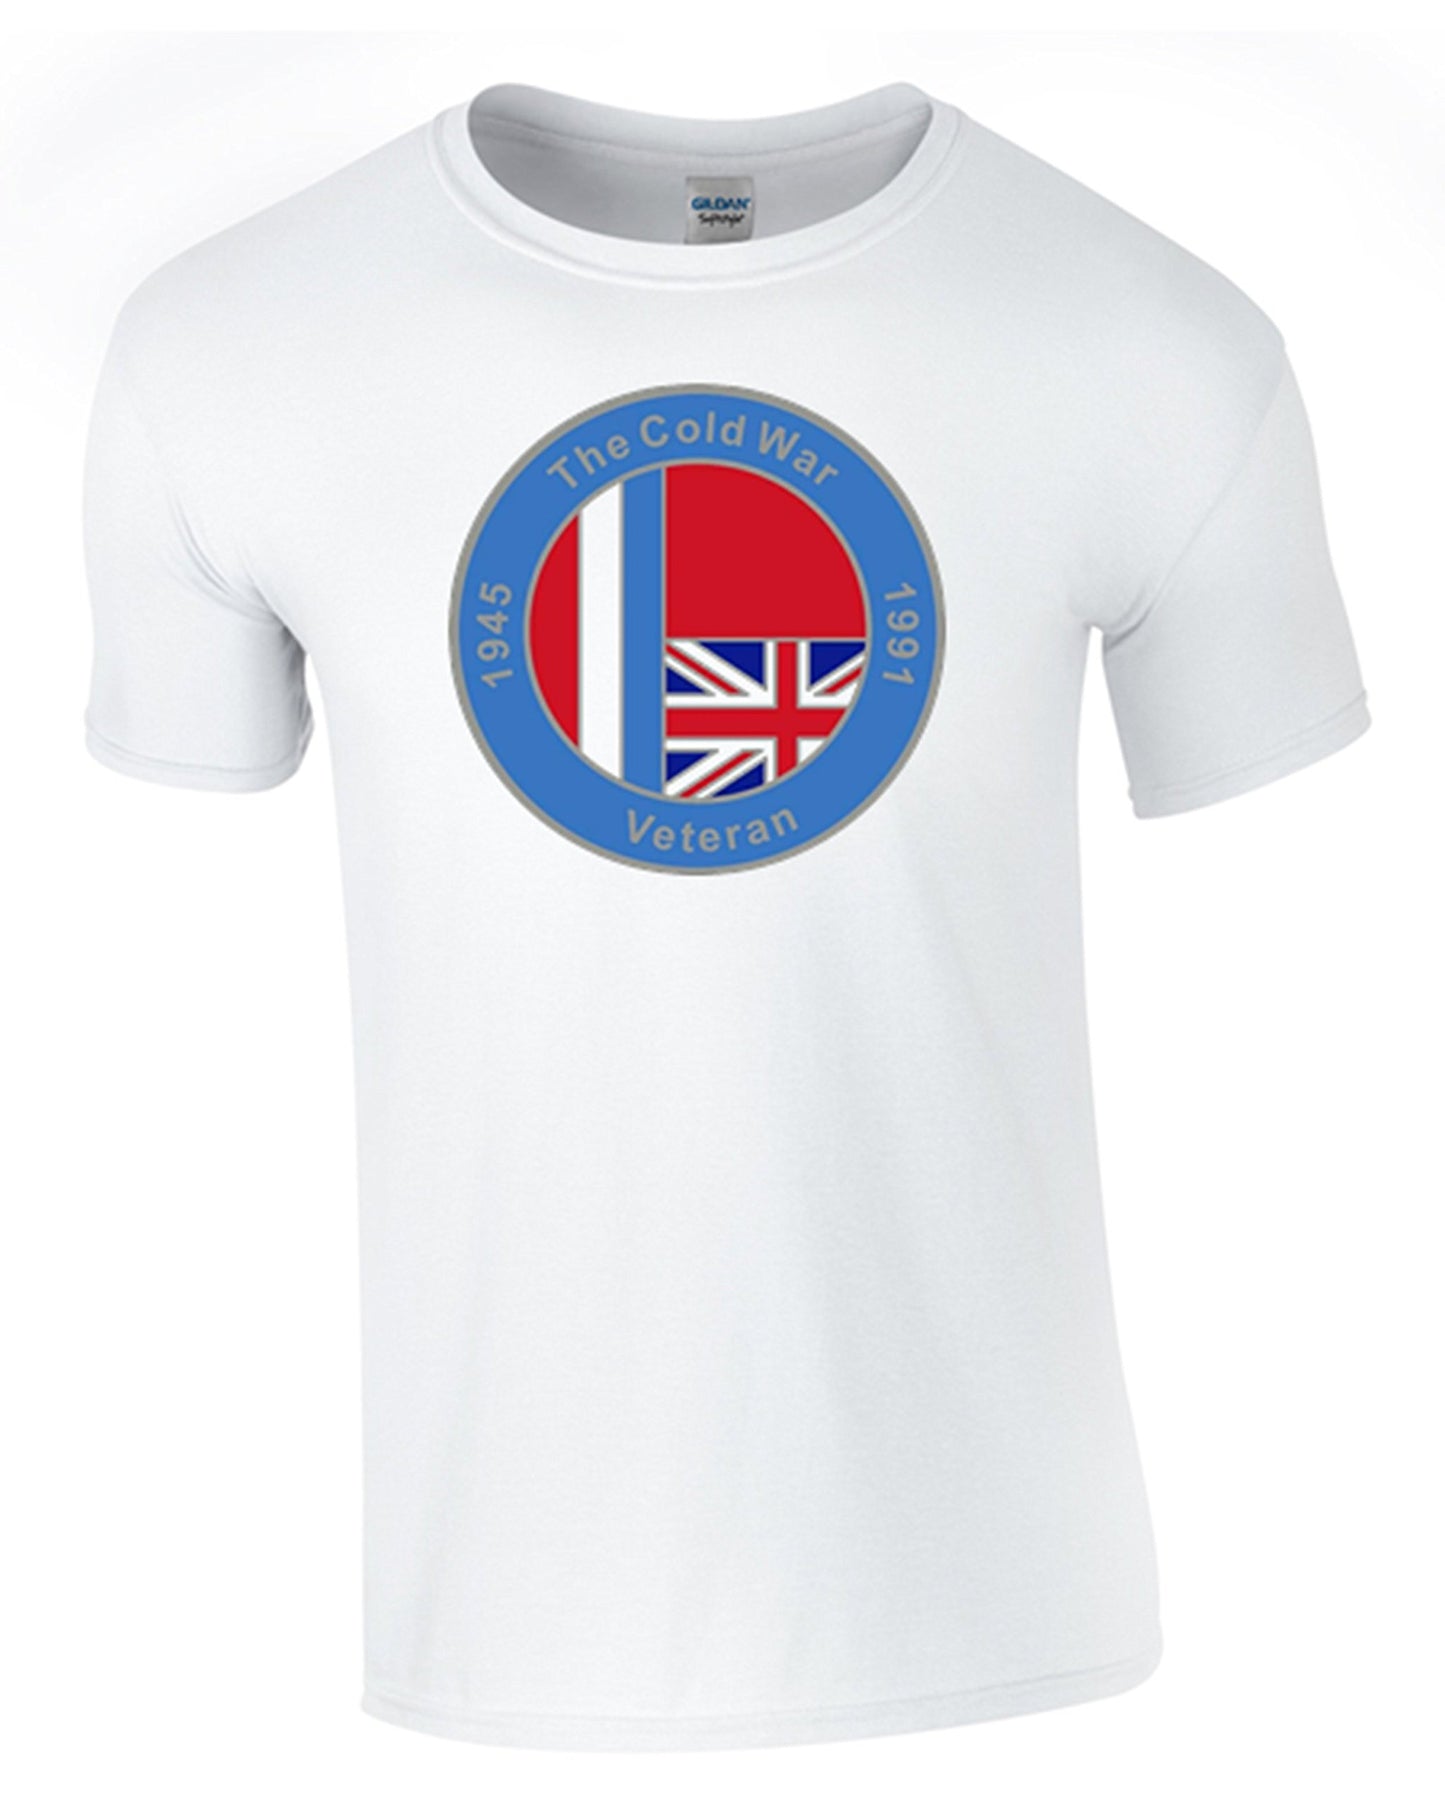 Bear Essentials Clothing. Cold War Op Banner T/Shirt (L, White) - Army 1157 kit Army 1157 Kit